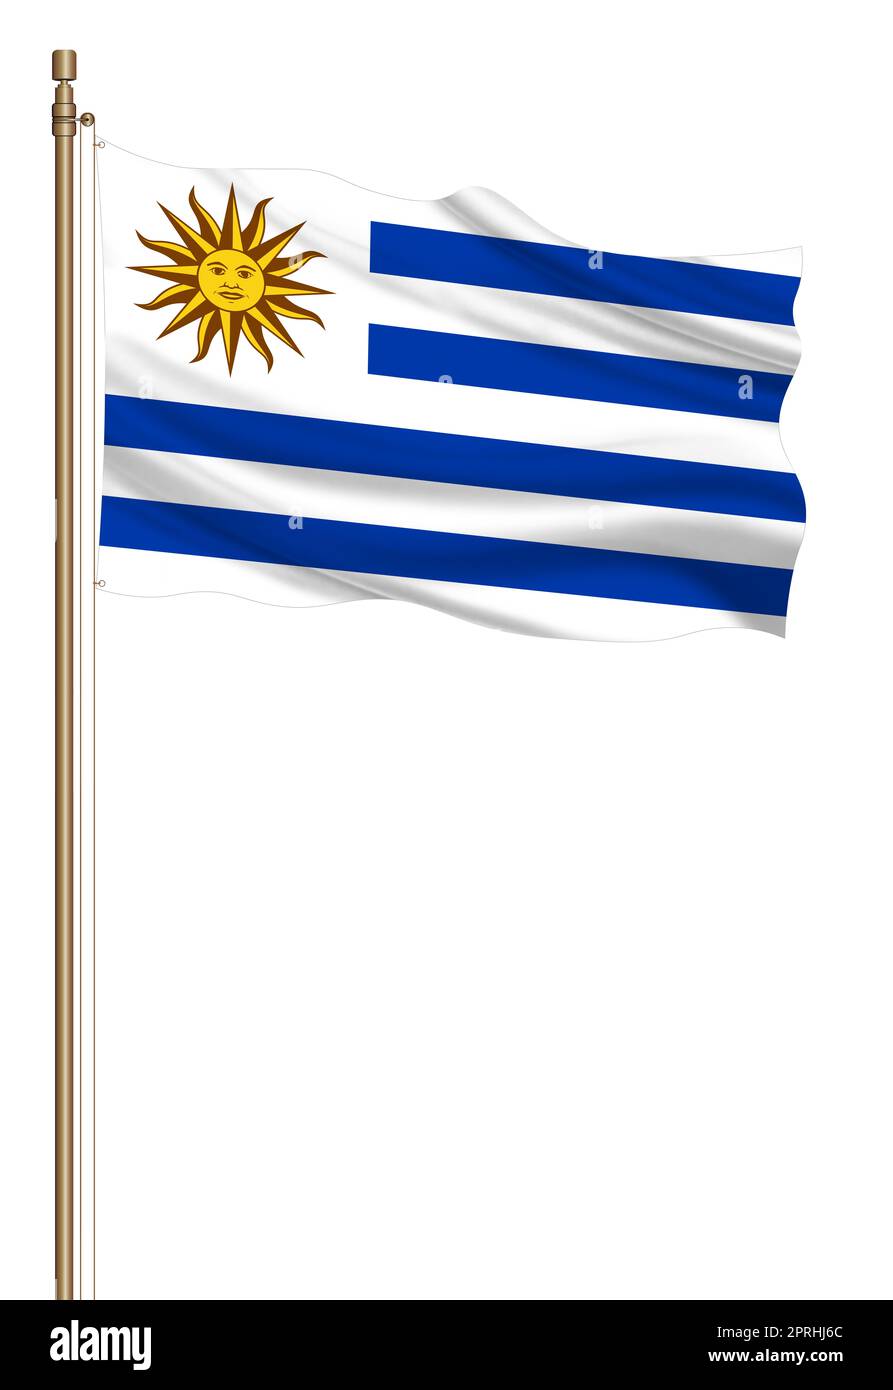 Premium Vector  Flag of uruguay with soccer ball as a background